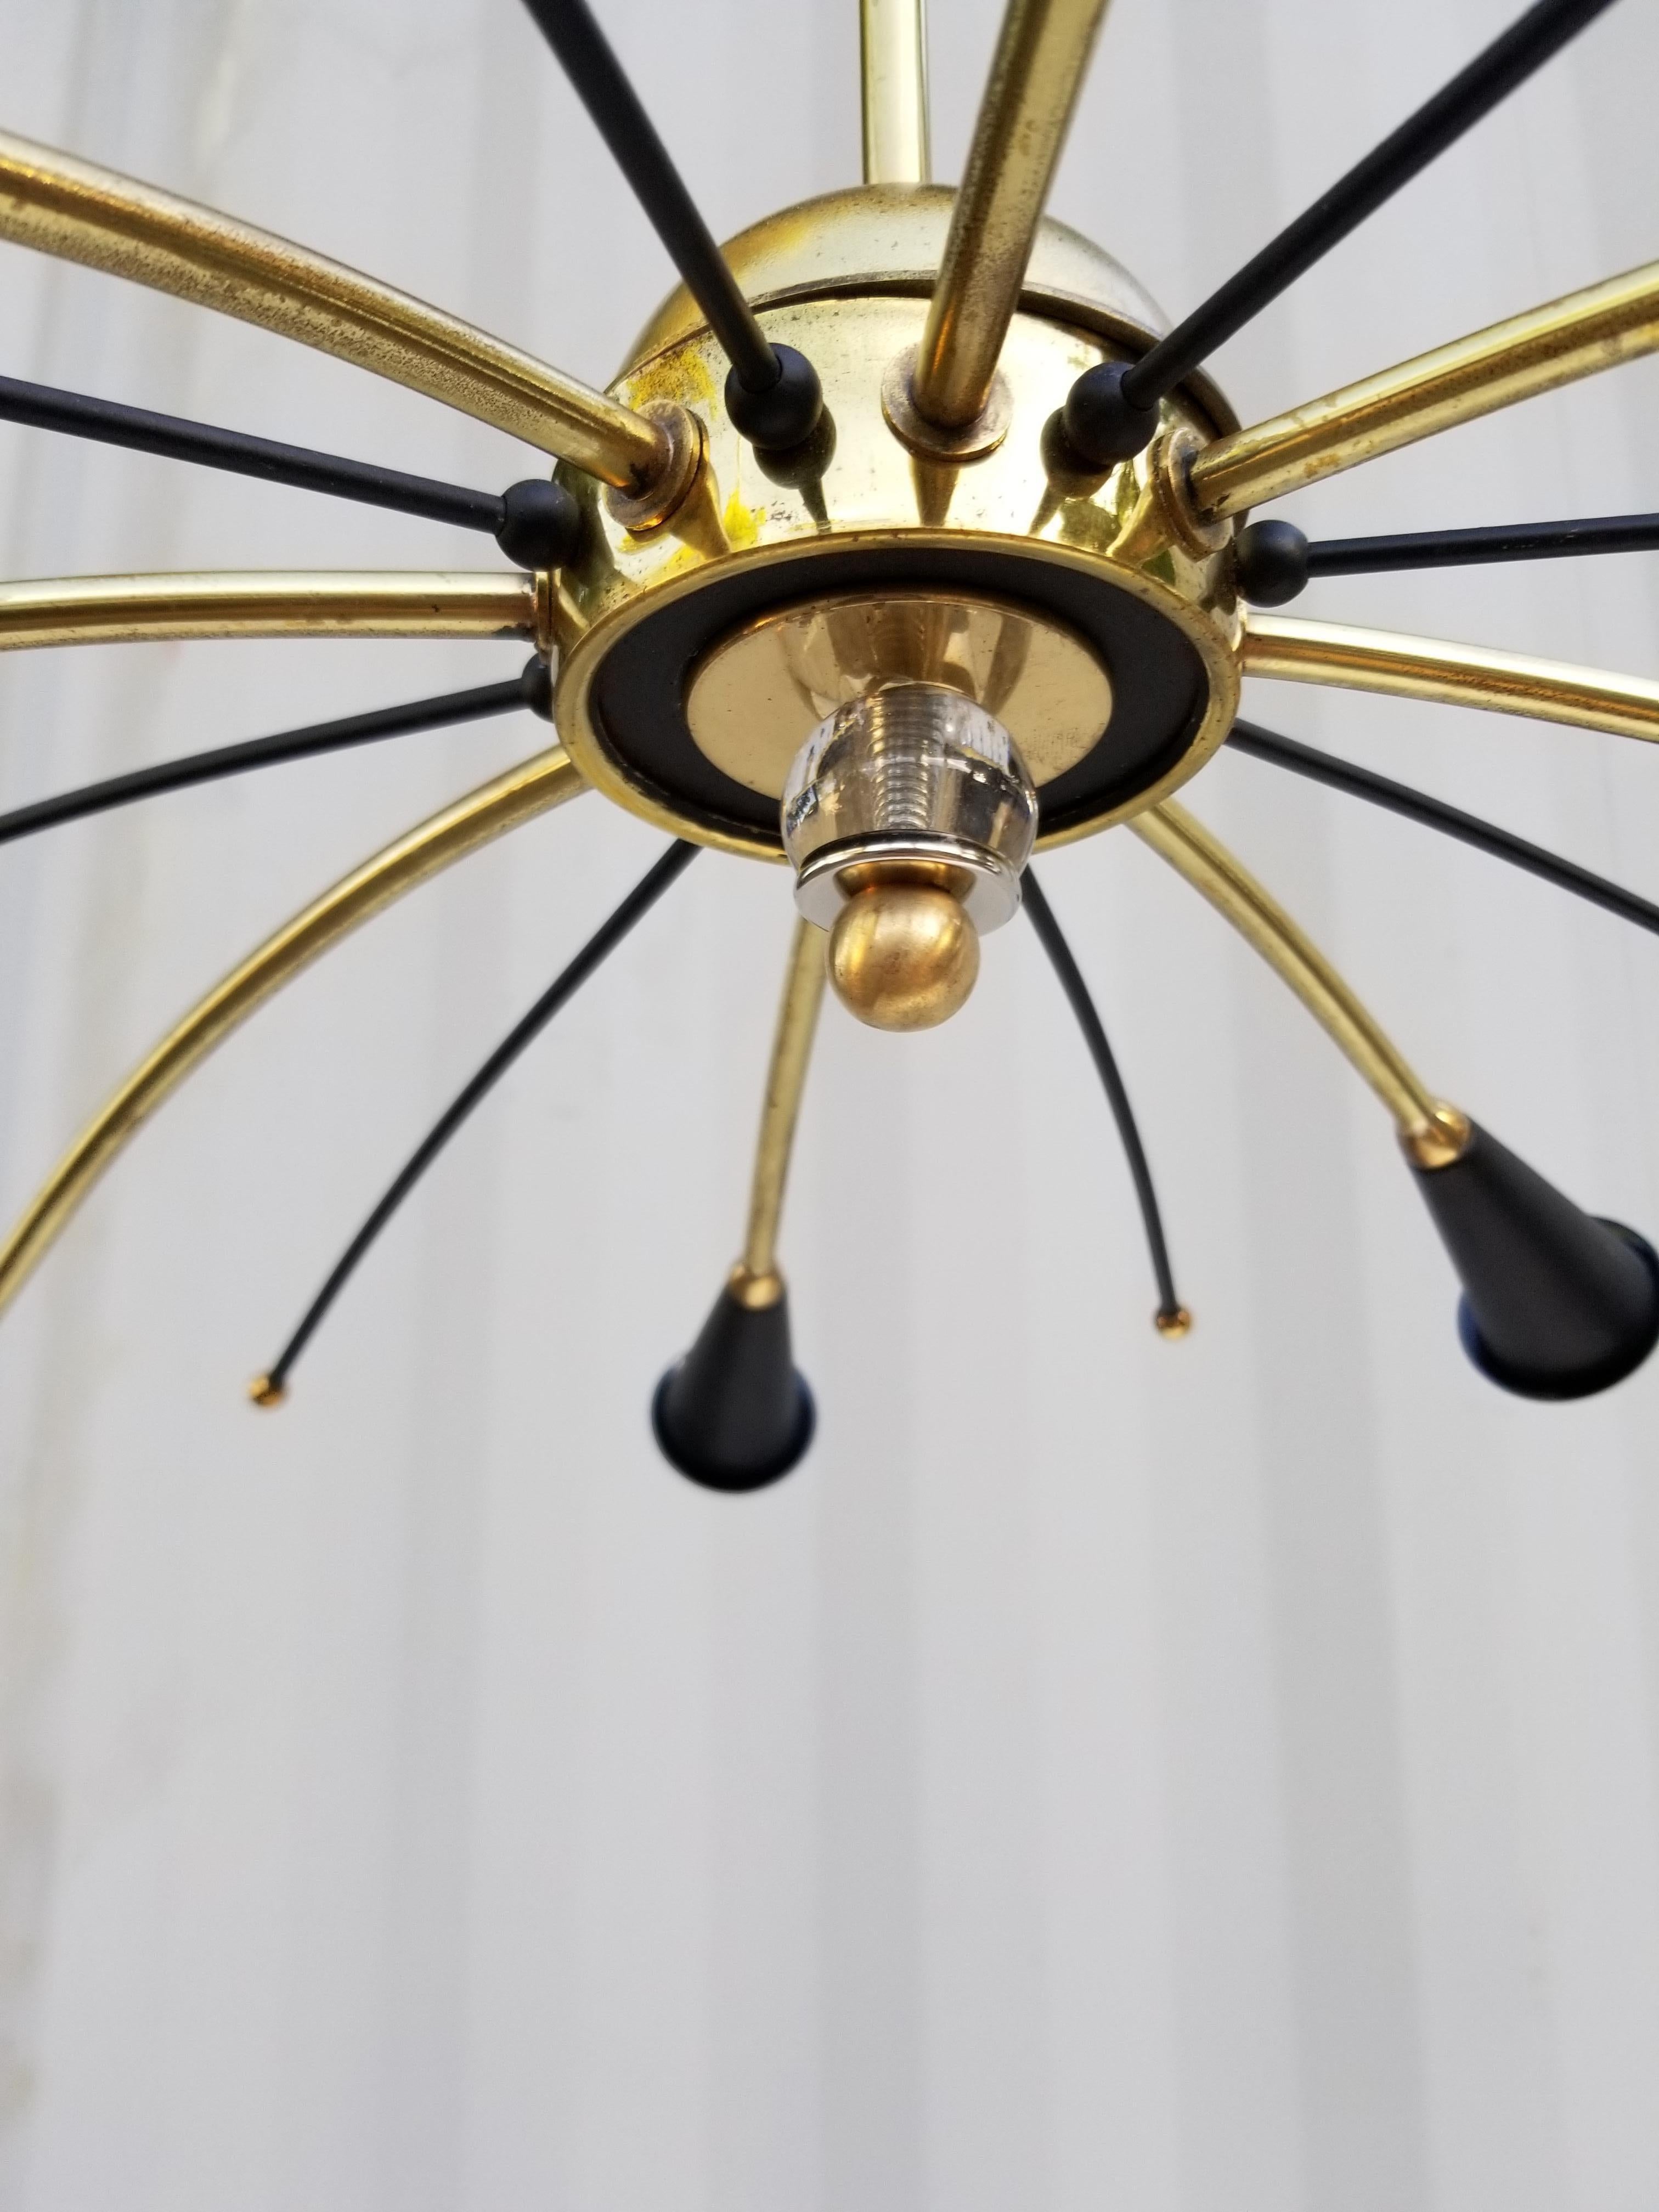 Stilnovo style 8-light chandelier, 40 watts max bulb.
US rewired.
Stem dimension can be modified, from 6 to 28 inches.